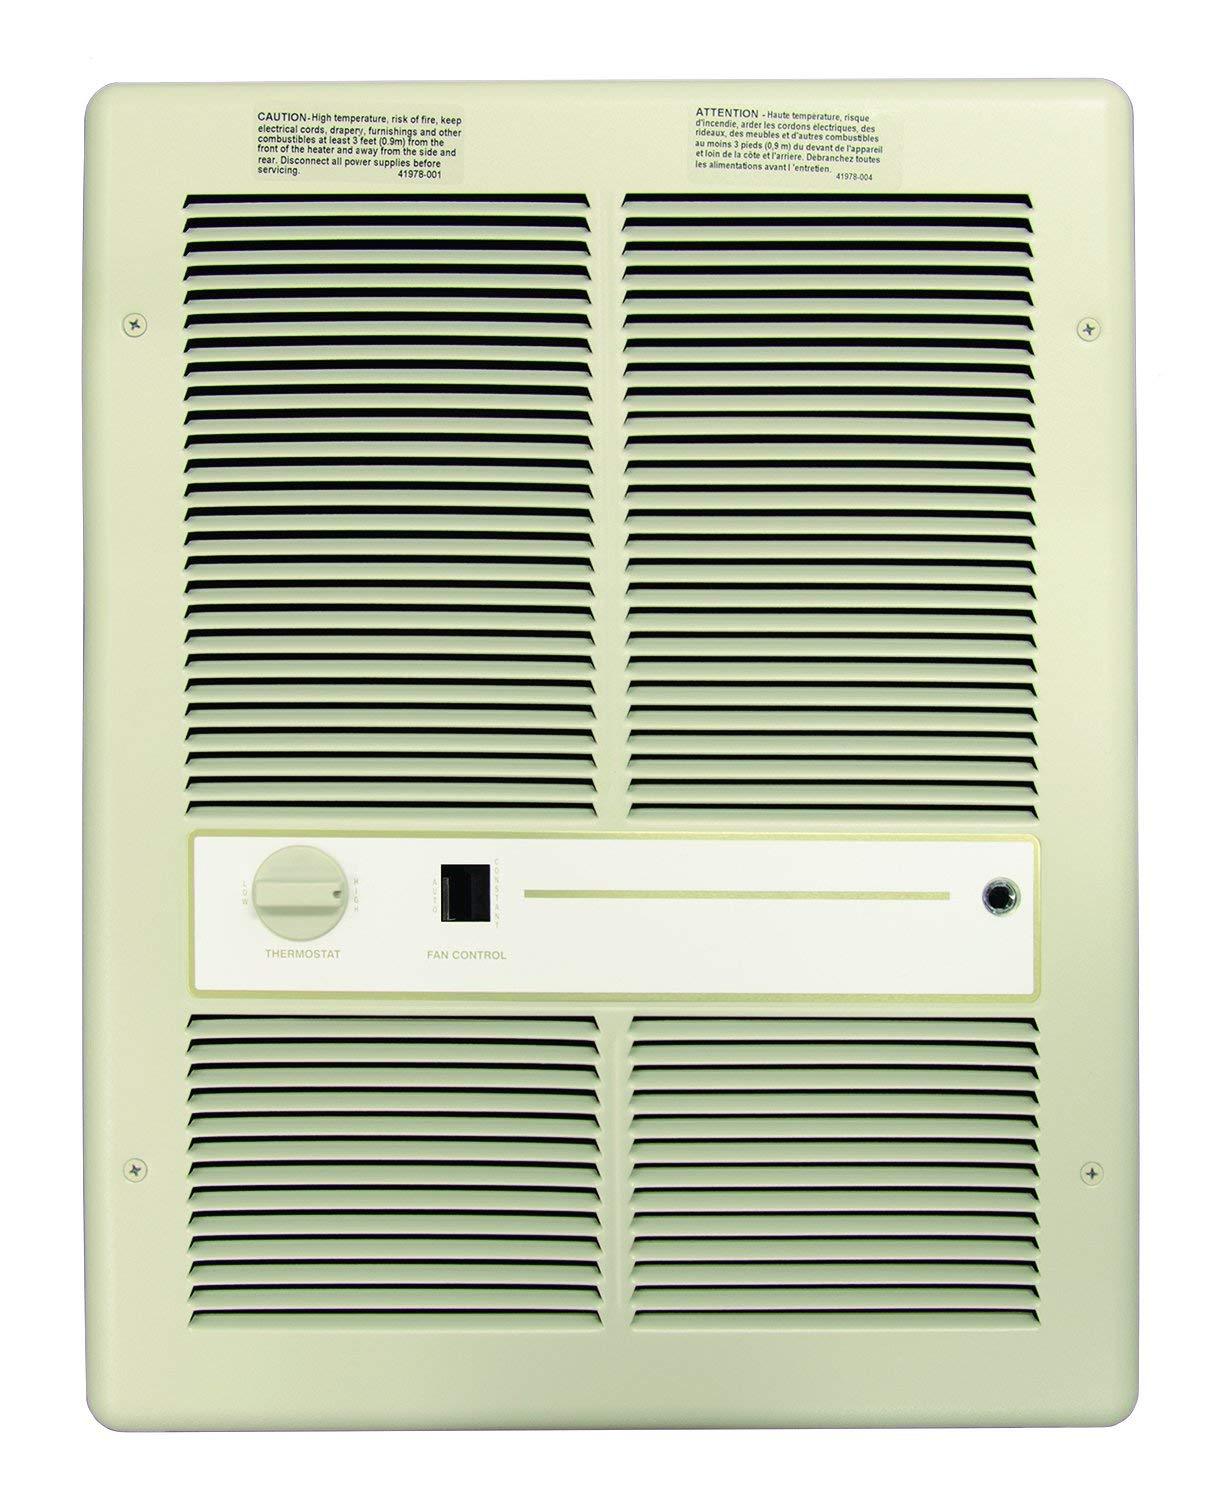 TPI 4800W 240V 3310 Series Fan Forced Wall Heater (Ivory) - With Summer Fan Switch - 1 Pole Thermostat - H3317TSRP